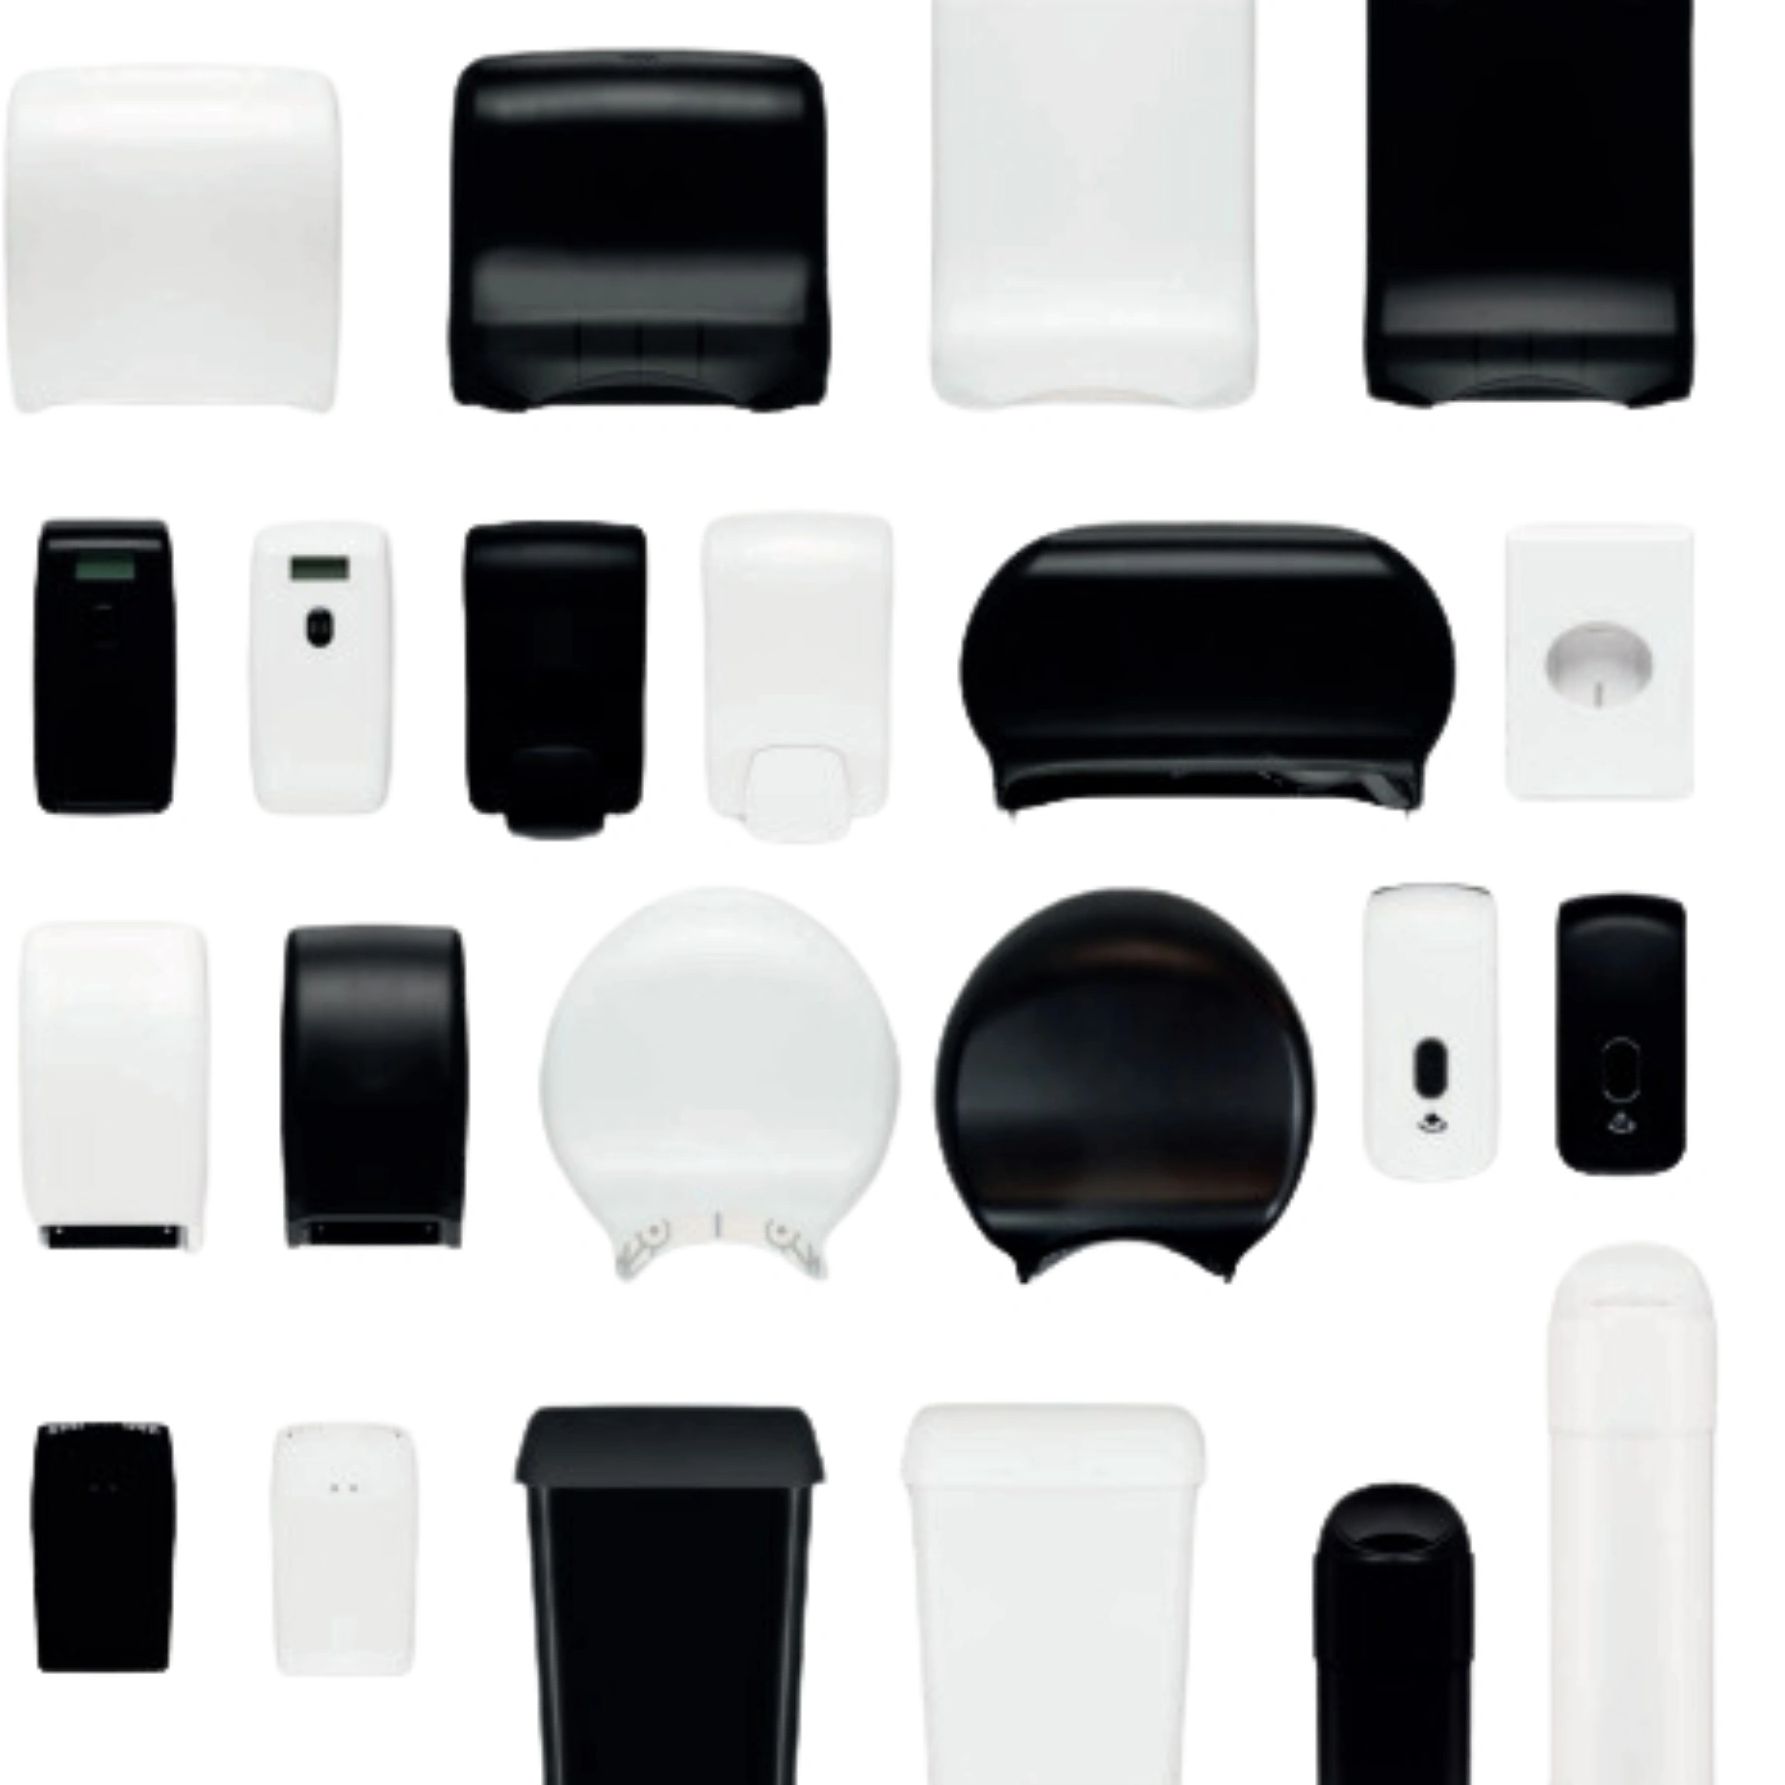 EDGE WASHROOM DISPENSERS in white and black collection of dispensers in various sizes and shapes